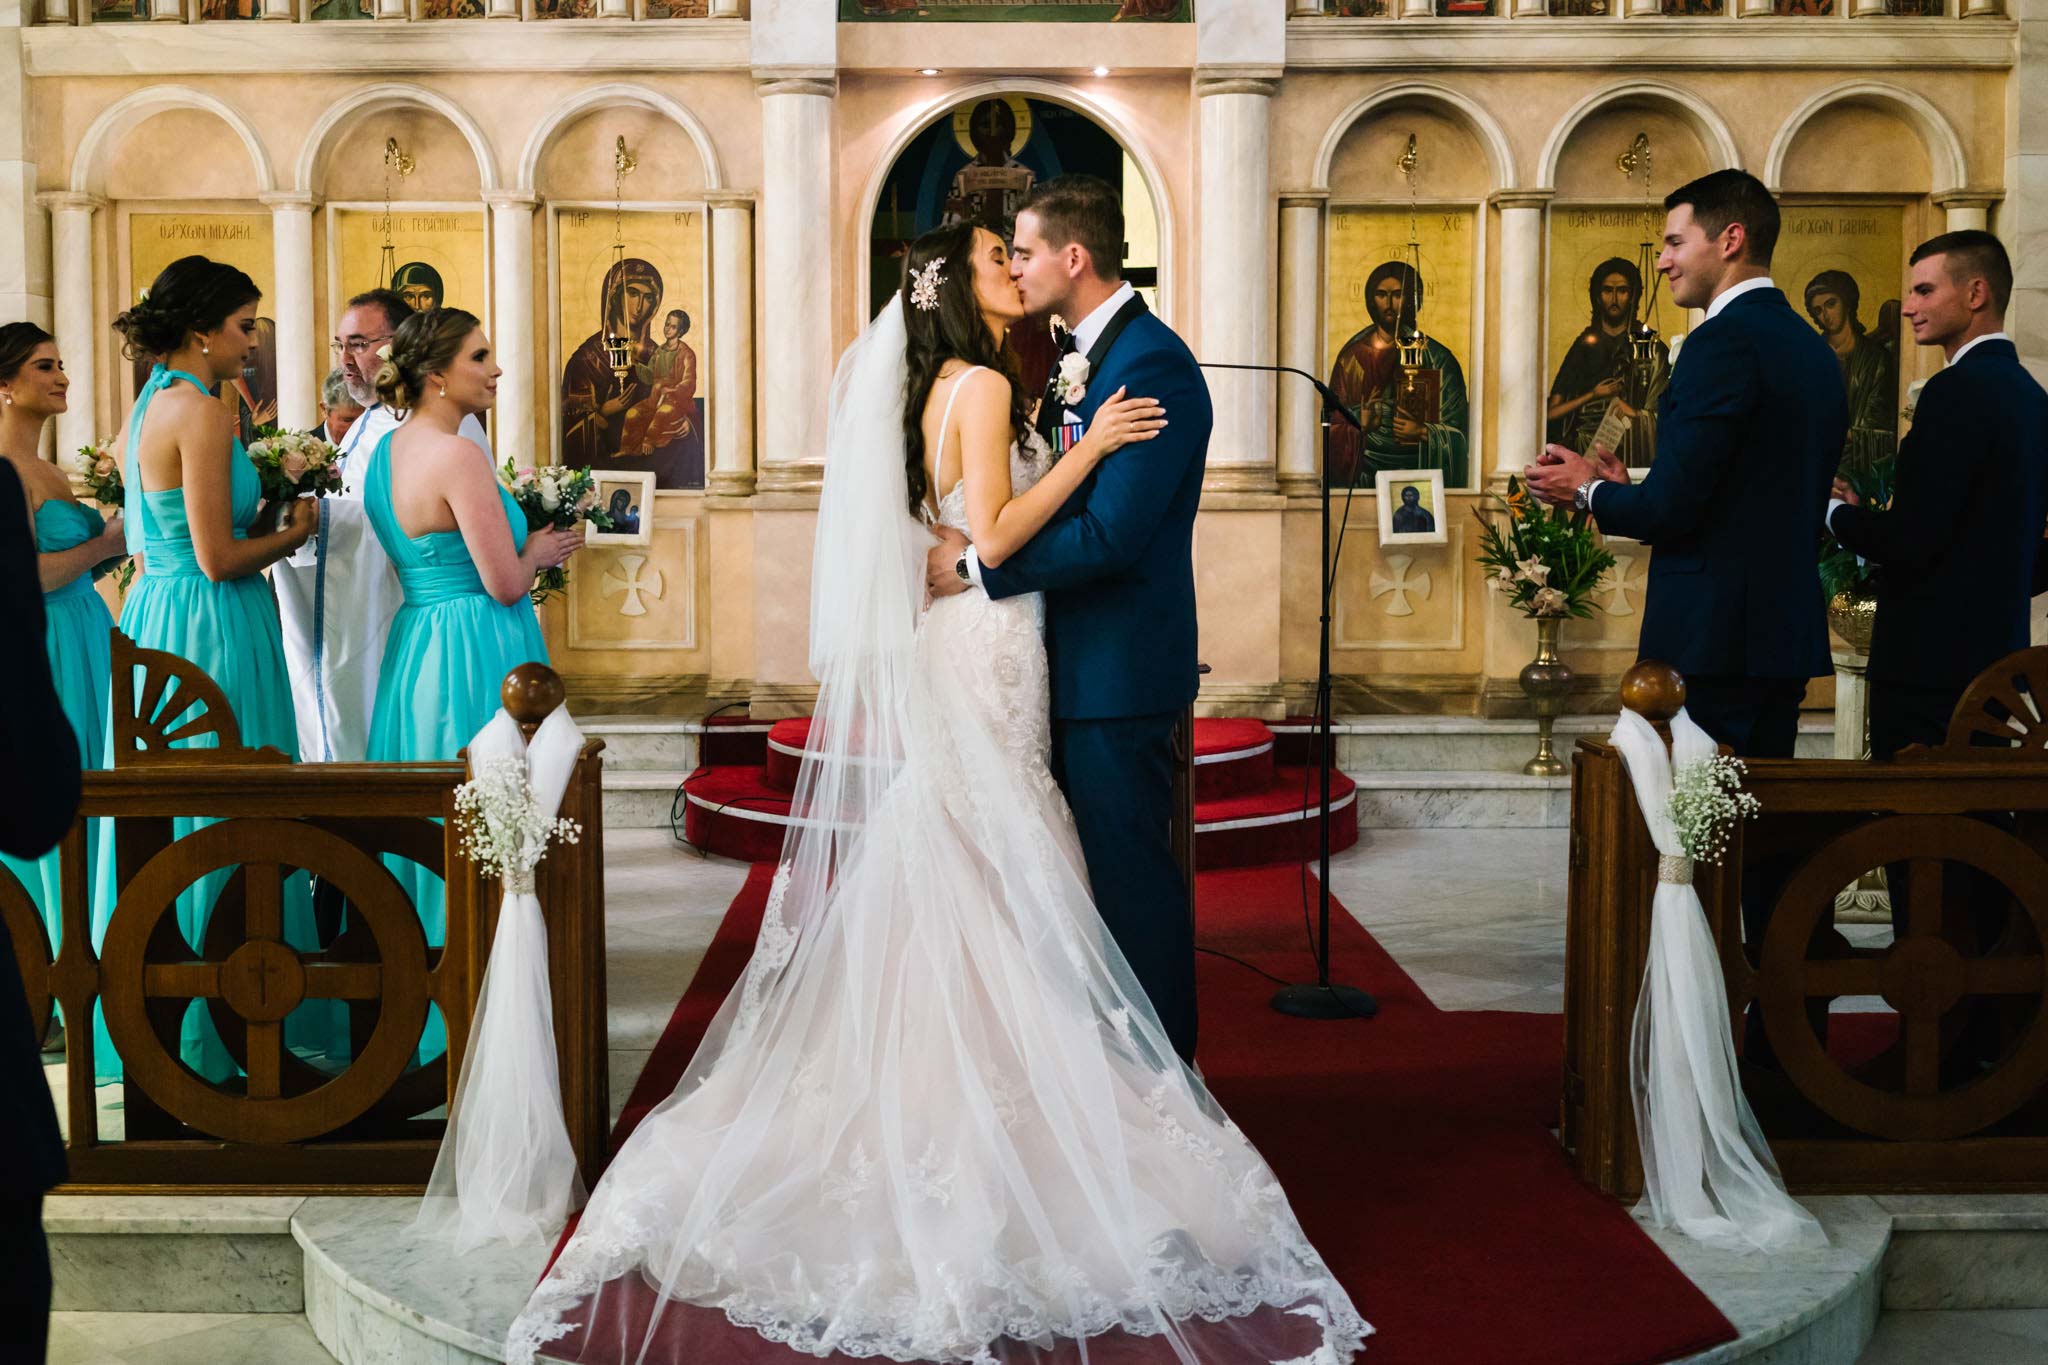 Bride and groom's first kiss during Greek orthodox wedding ceremony